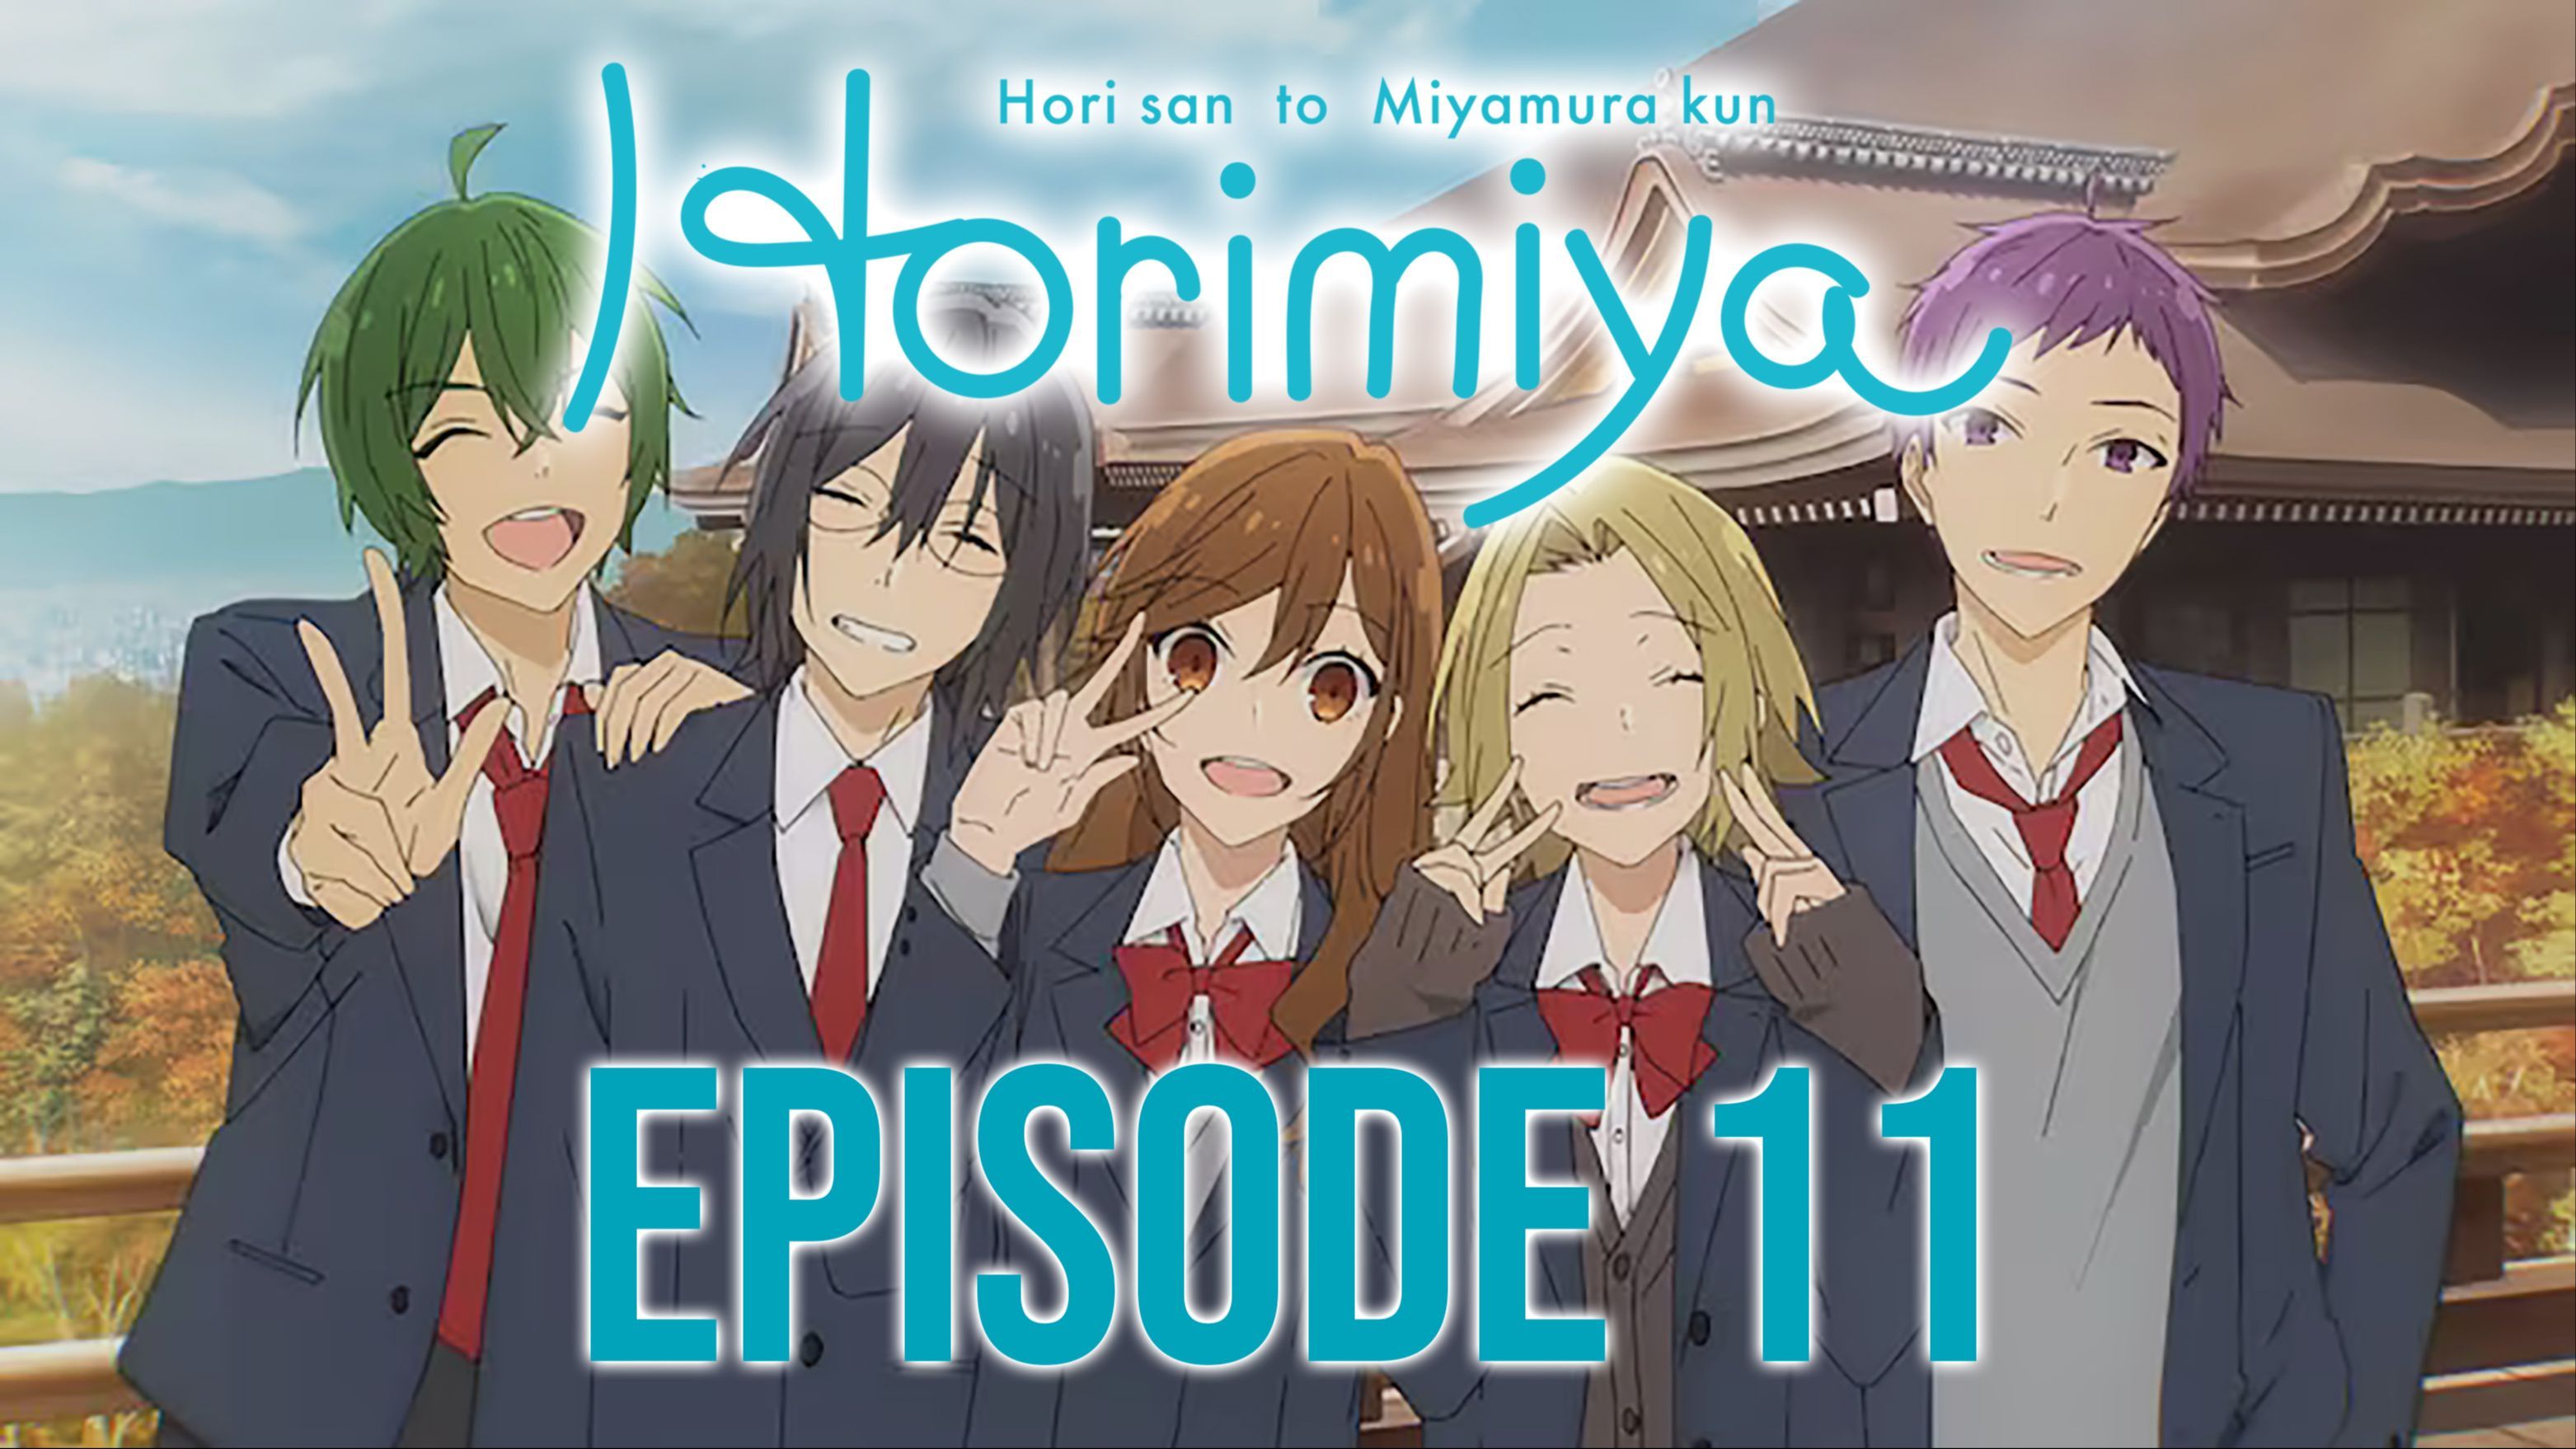 Horimiya episode 13: Release date and time confirmed for finale!